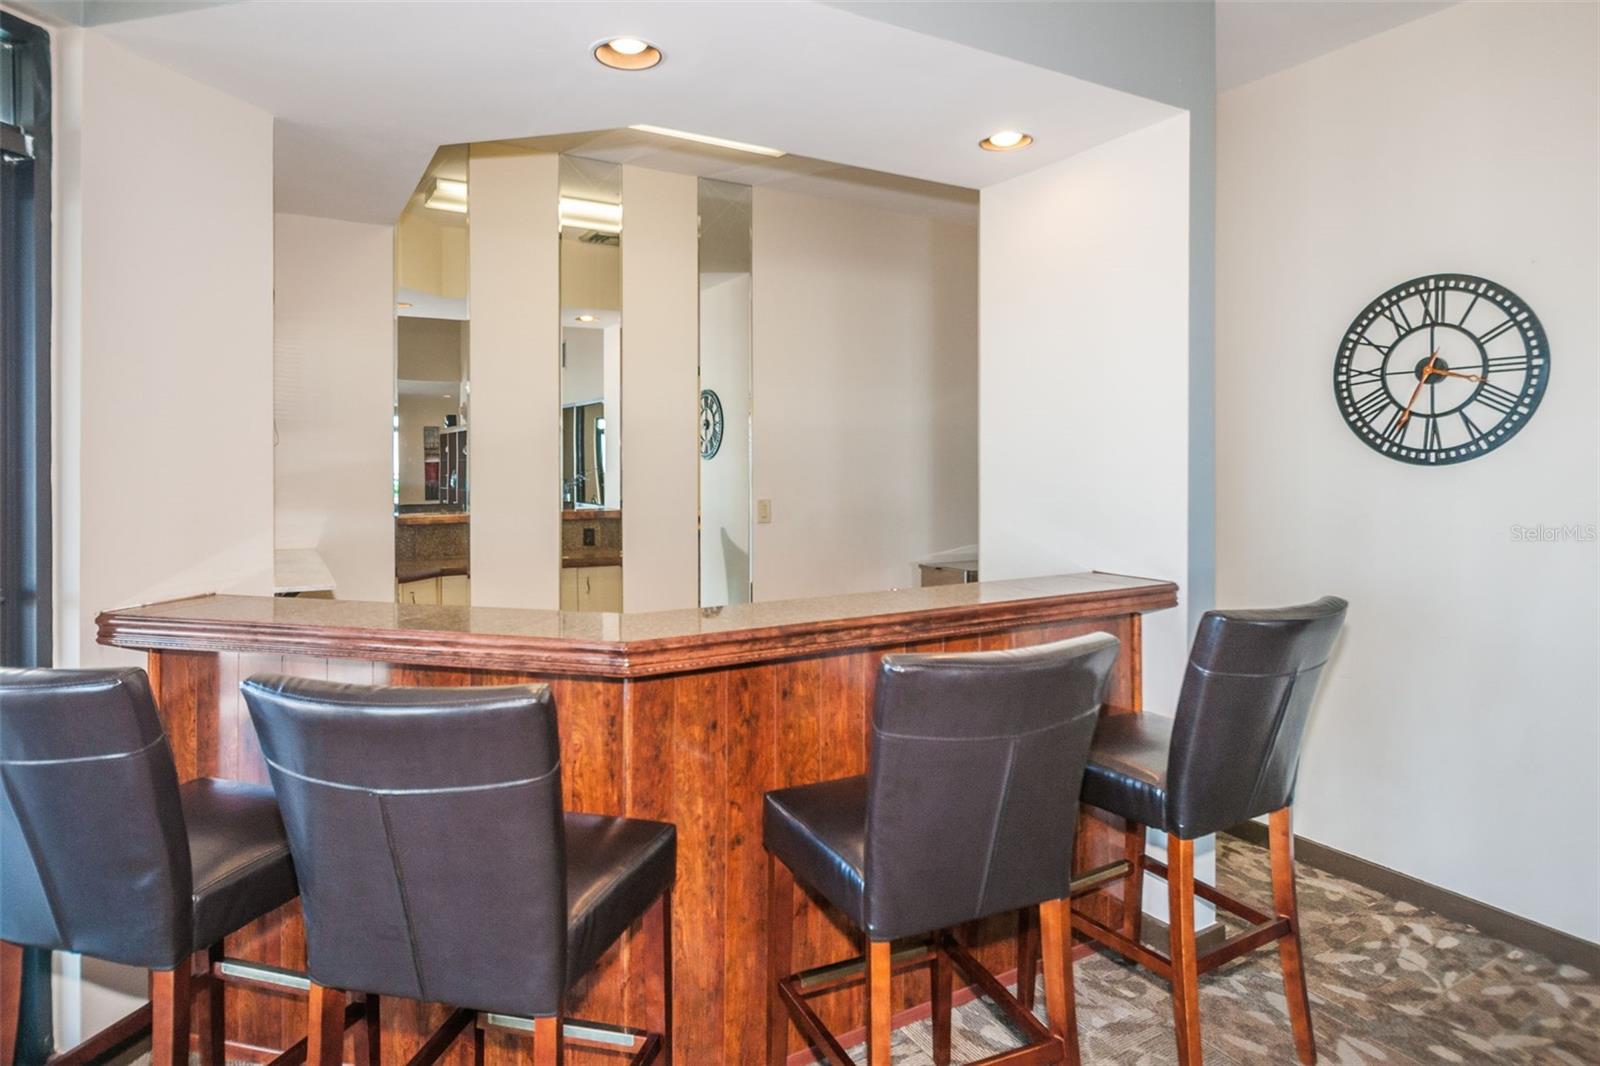 Clubroom wet bar with chairs